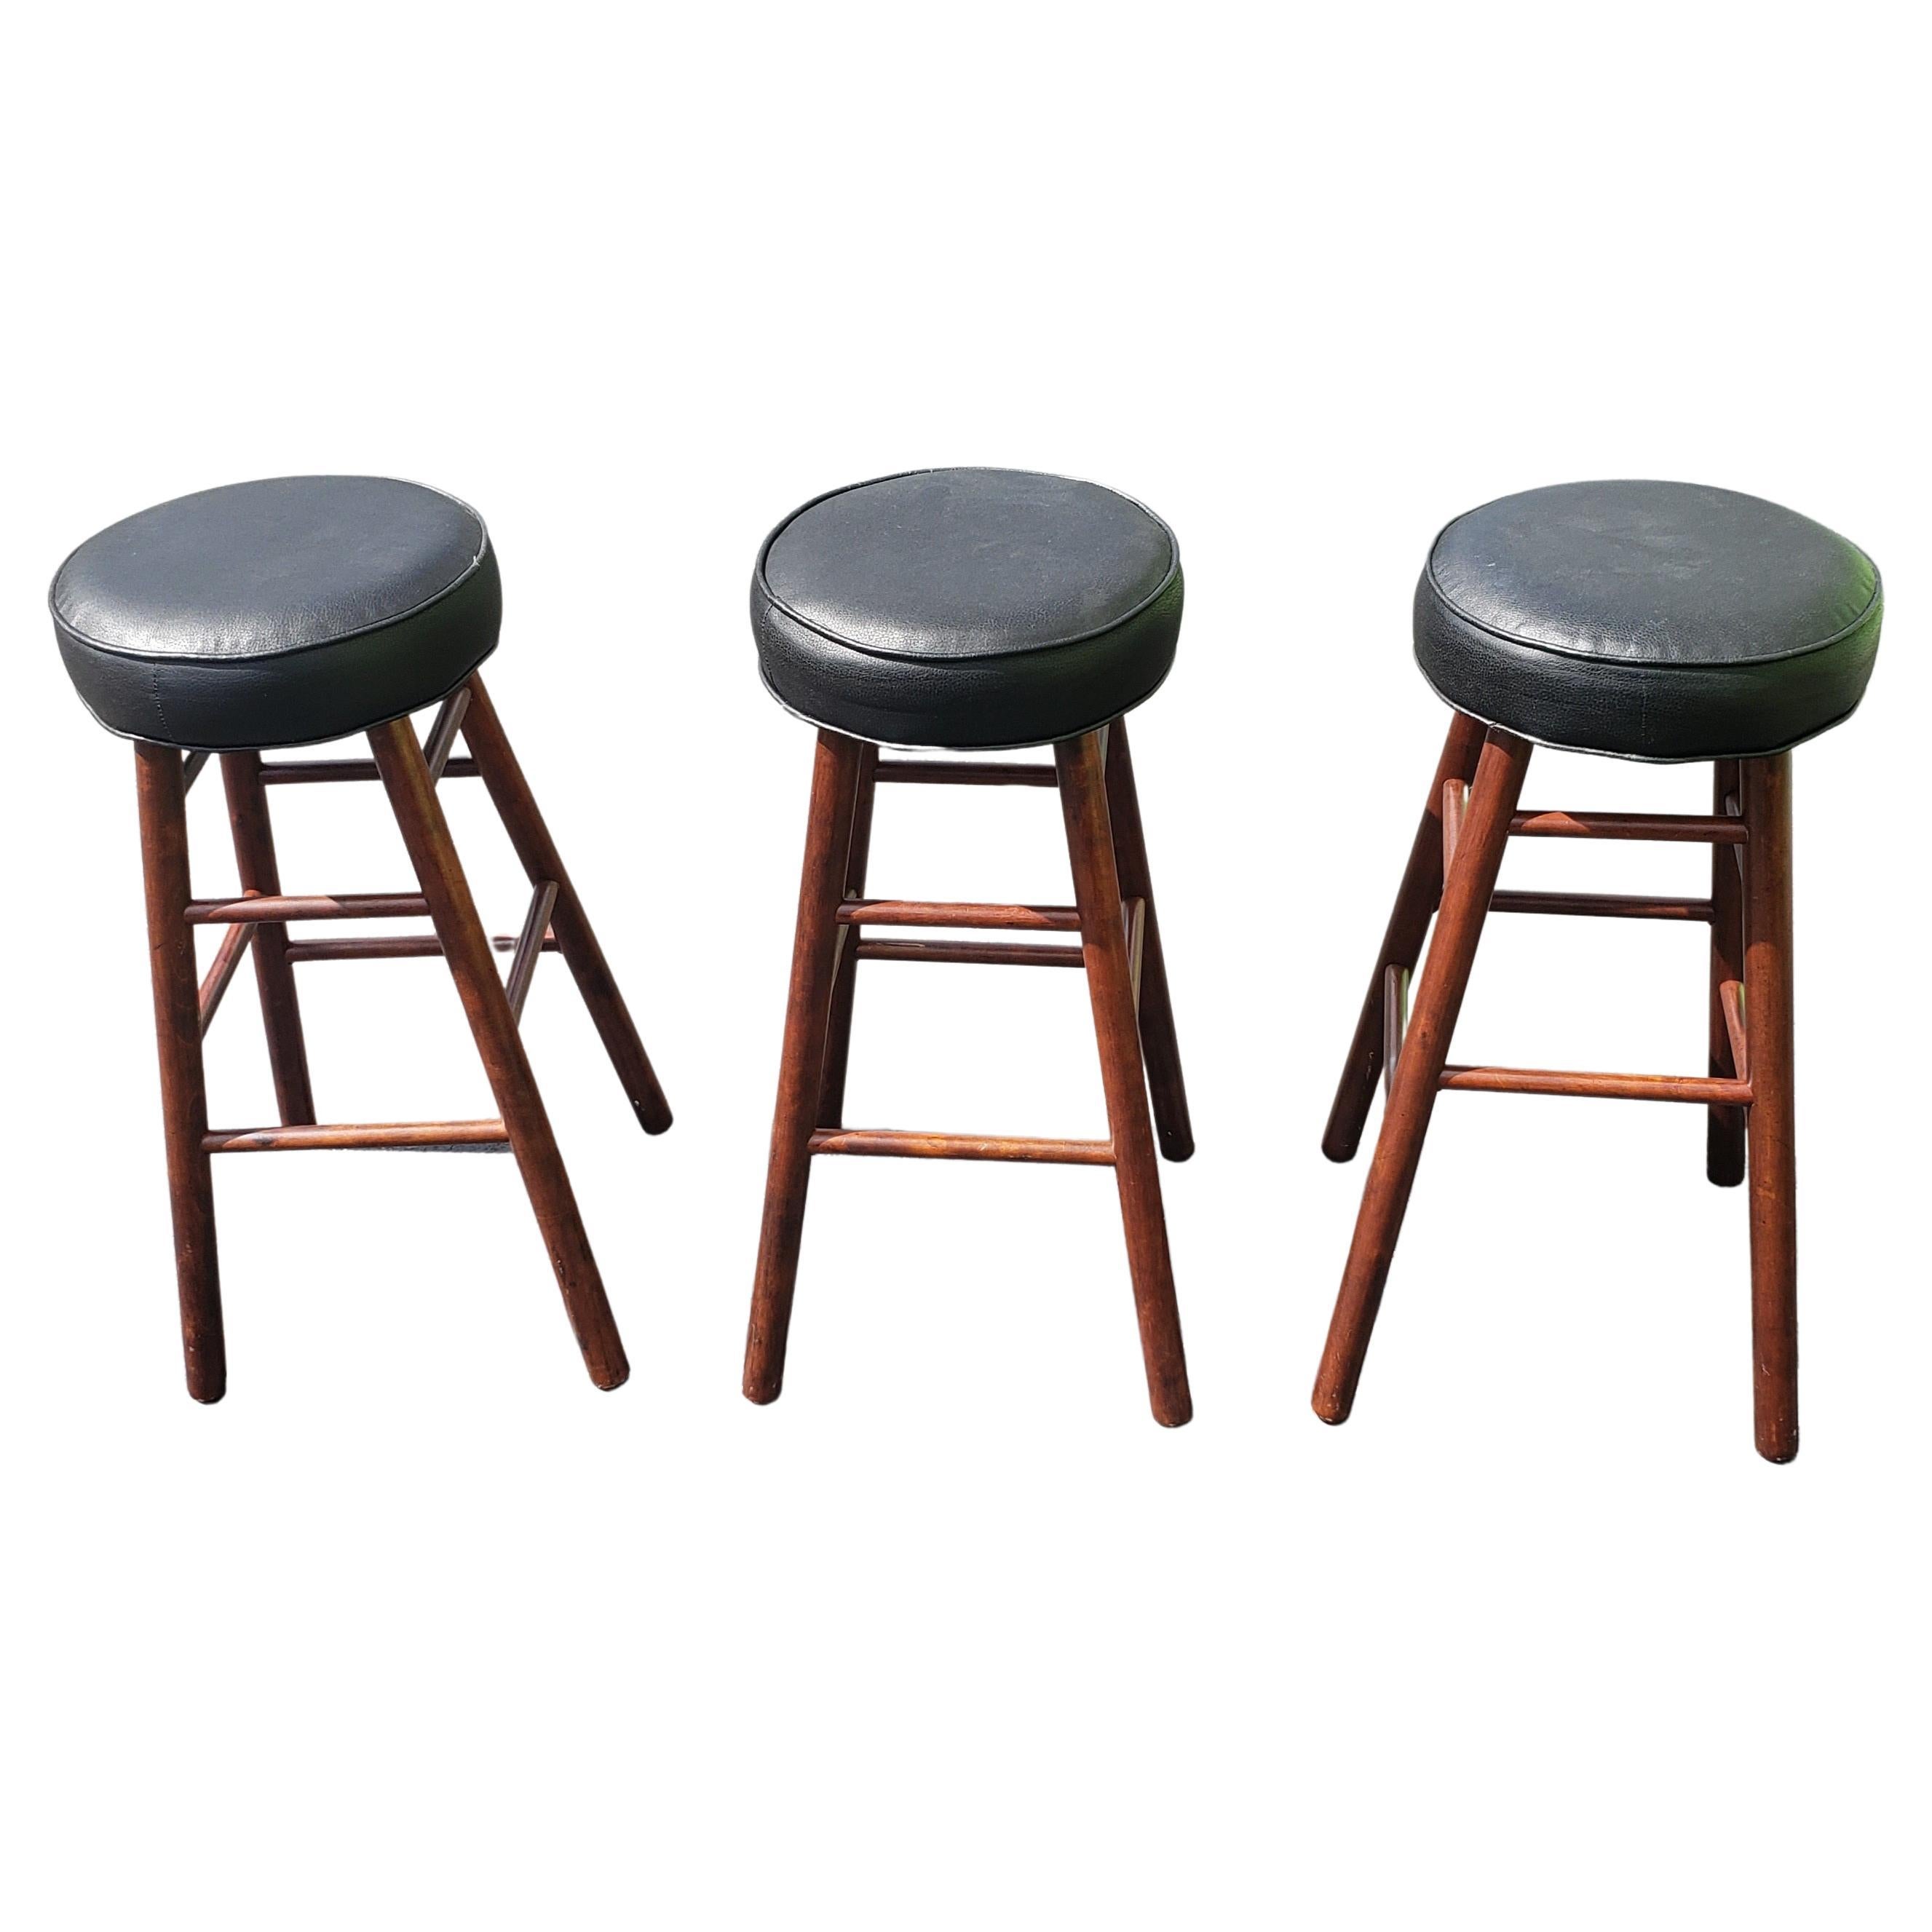 Set of 3 Mid-Century Maple and PU leather seat bar stools measuring 14 inches in diameter seats, 16.5 inches wide and 16.5 inches at the base and stand 30